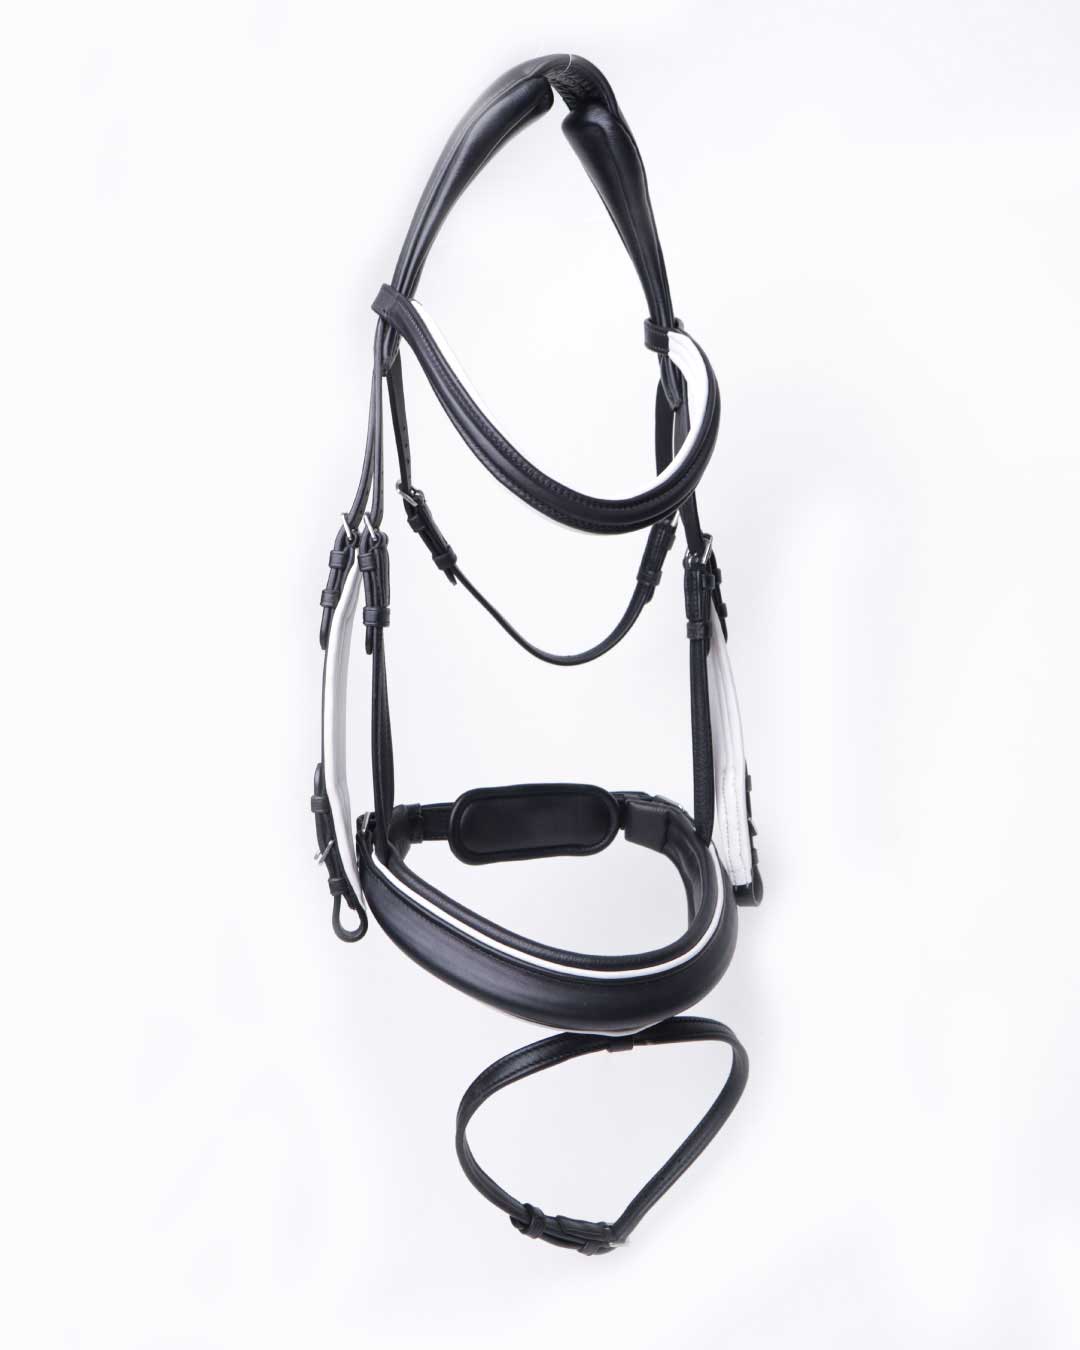 Soft leather traditional dressage. Snaffle flash bridle including reins.